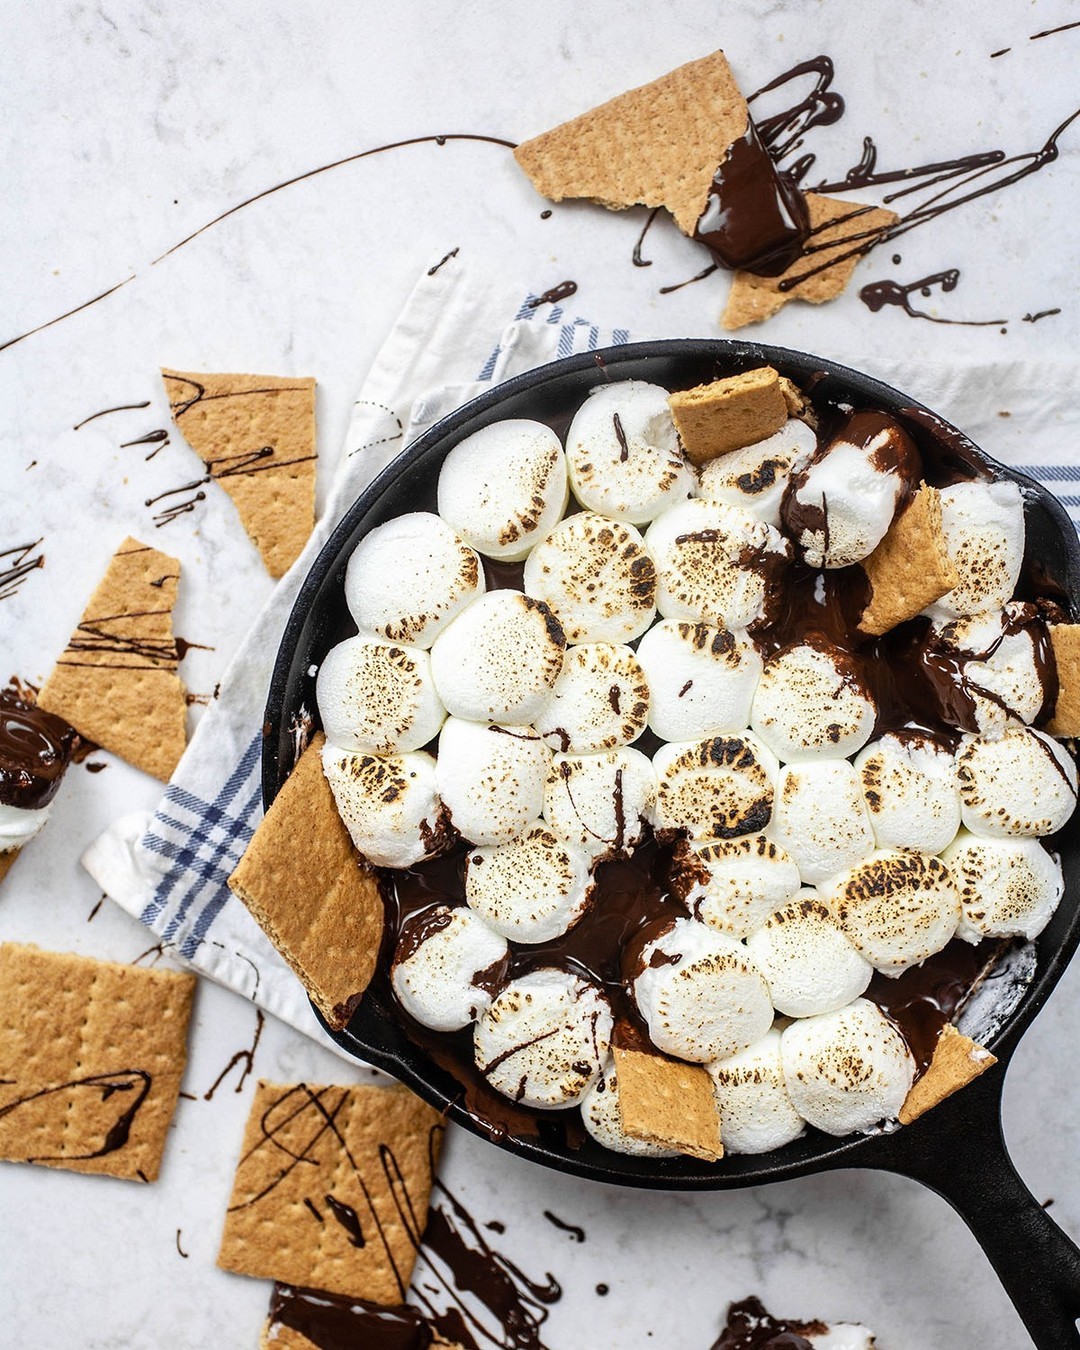 On #NationalSmoresDay we’re taking our s'mores experience to a whole new level with this s'mores skillet! What's better on a summer night than chocolate, marshmallows, and graham crackers? Recipe is linked in our bio.